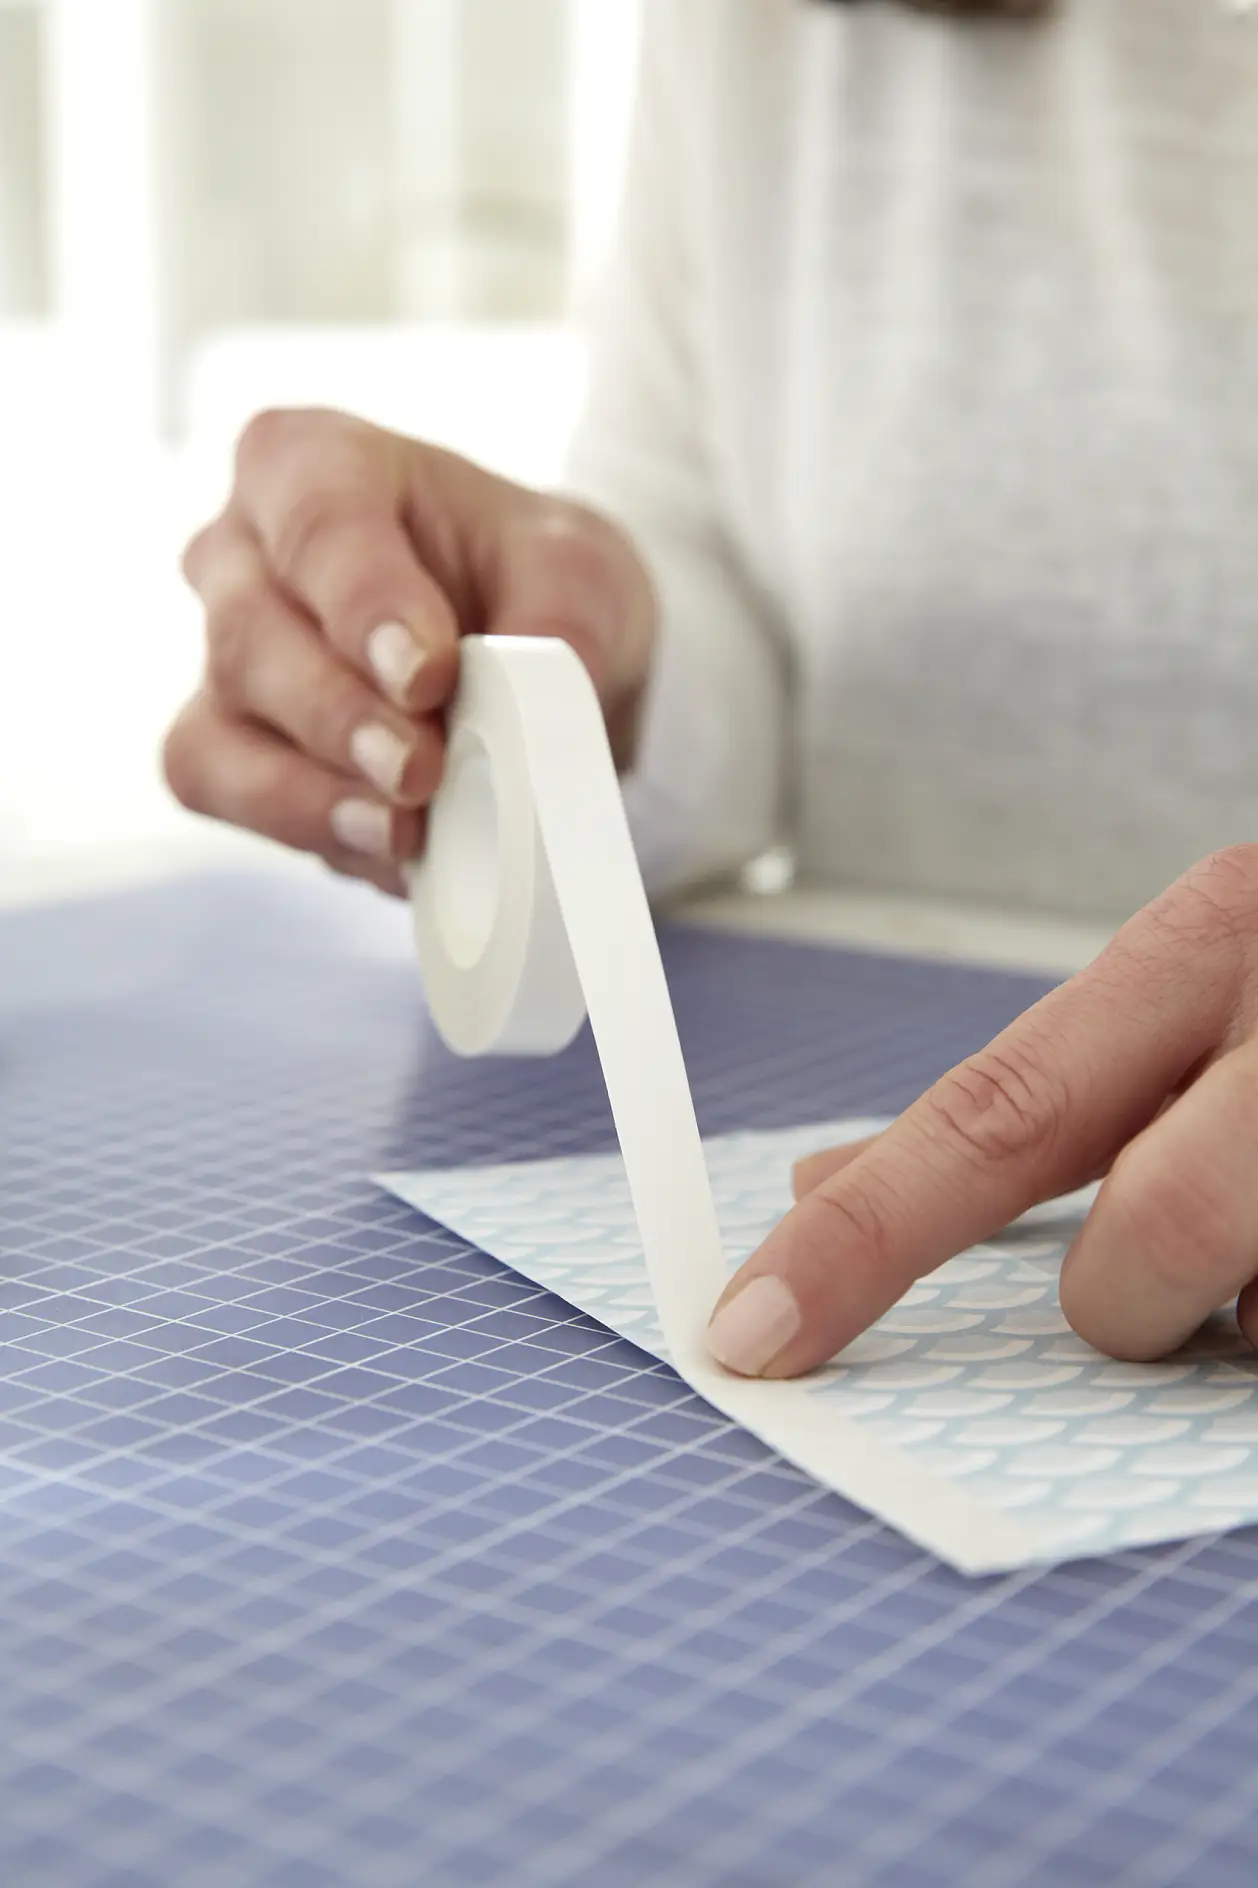 Apply a strip of tesa® double-sided adhesive tape on the patterned side of one of the folded surfaces.